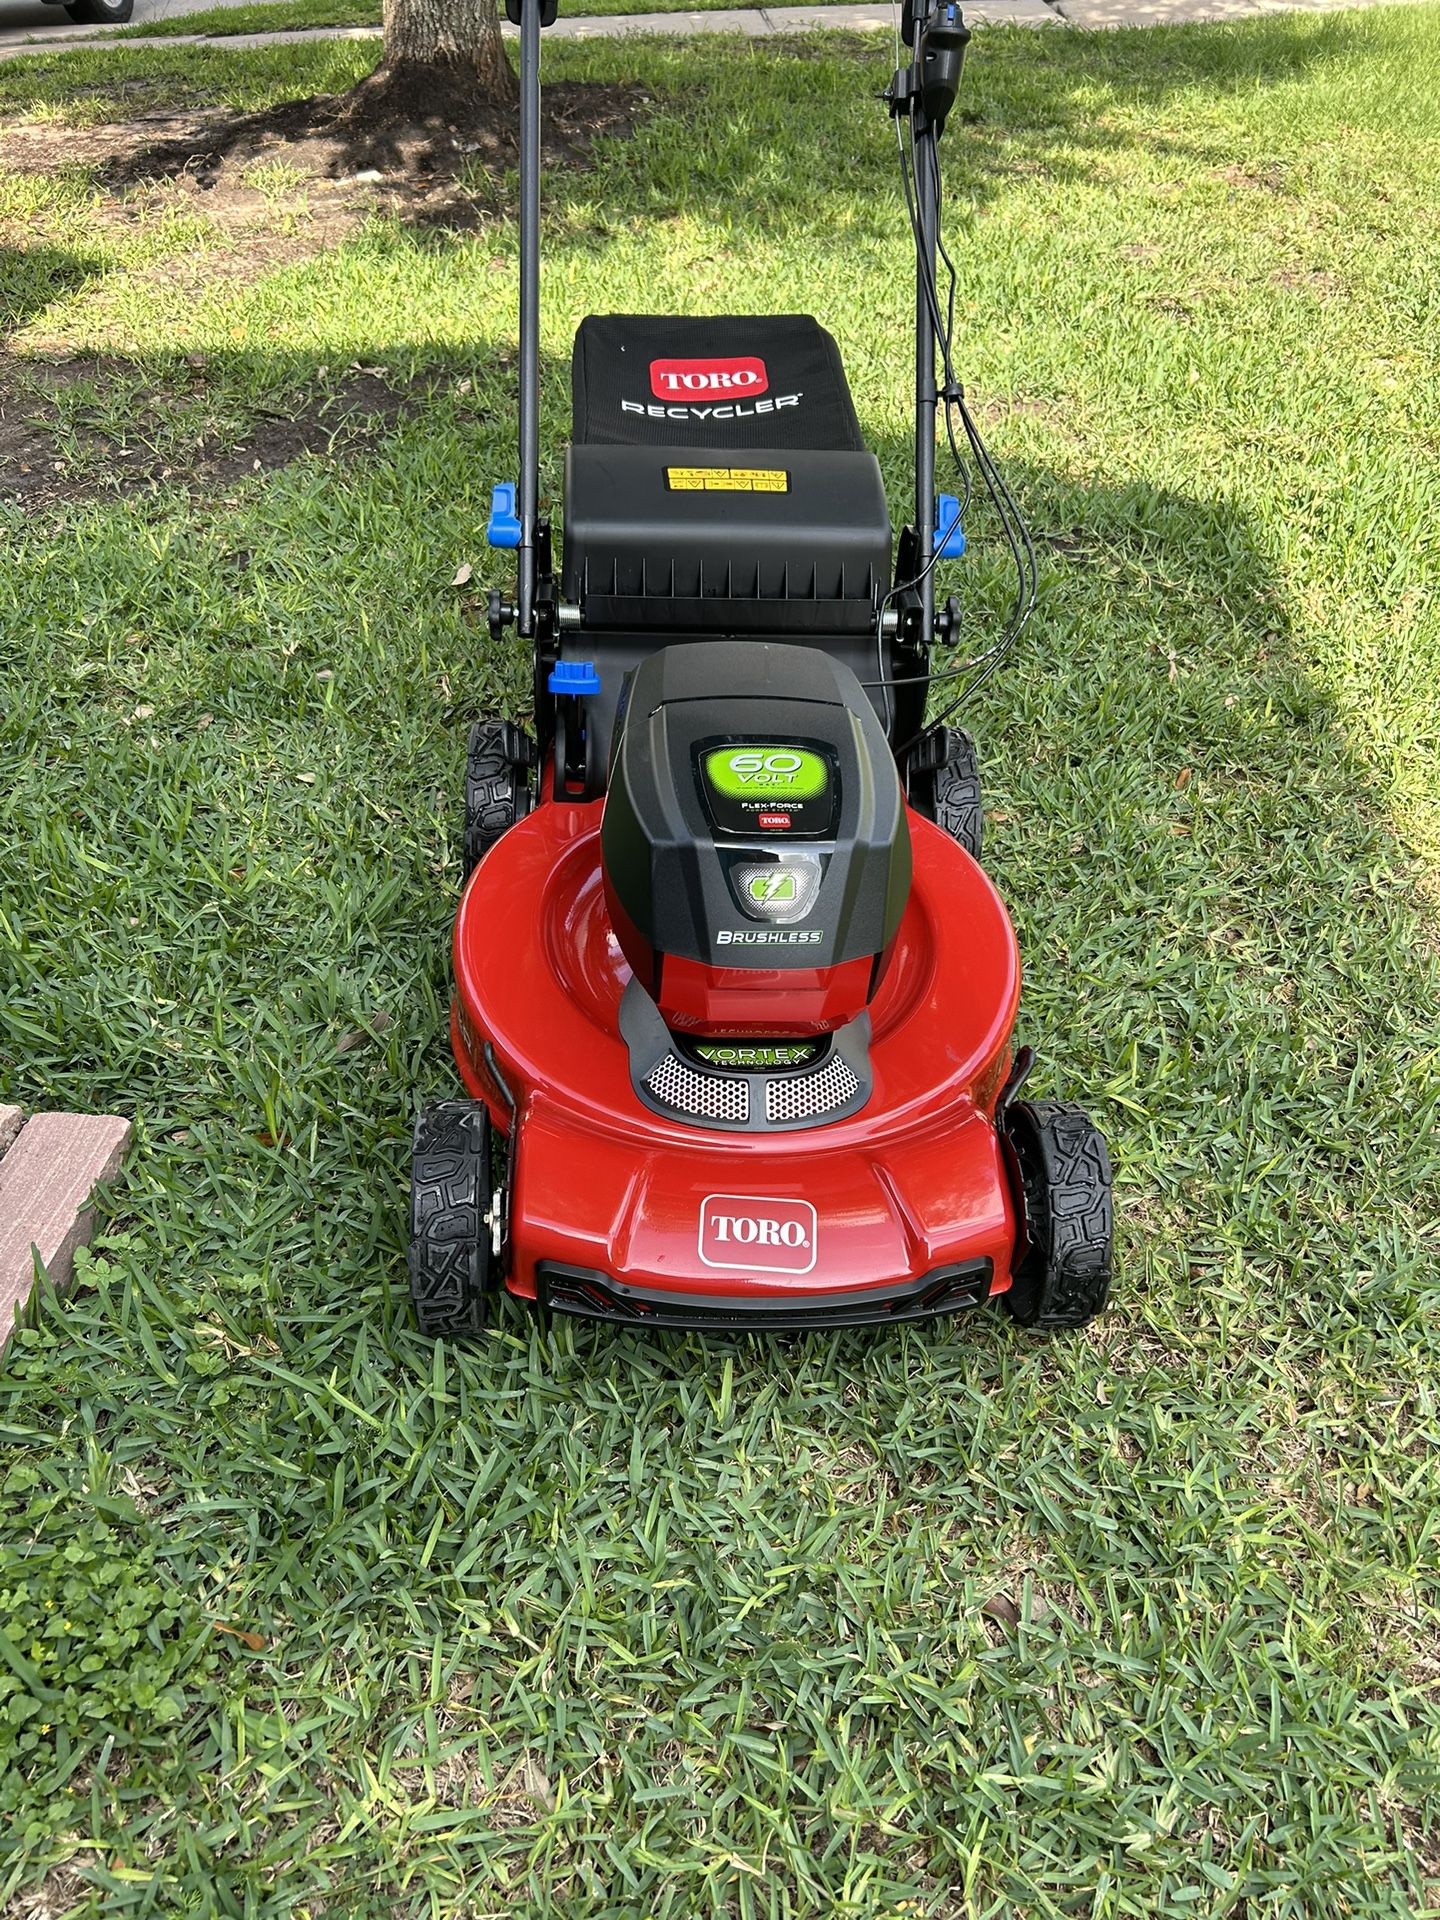 Toro 22” 60V Battery Powered Lawn Mower Brand New Tool Only No Battery Or Charger Are Included 